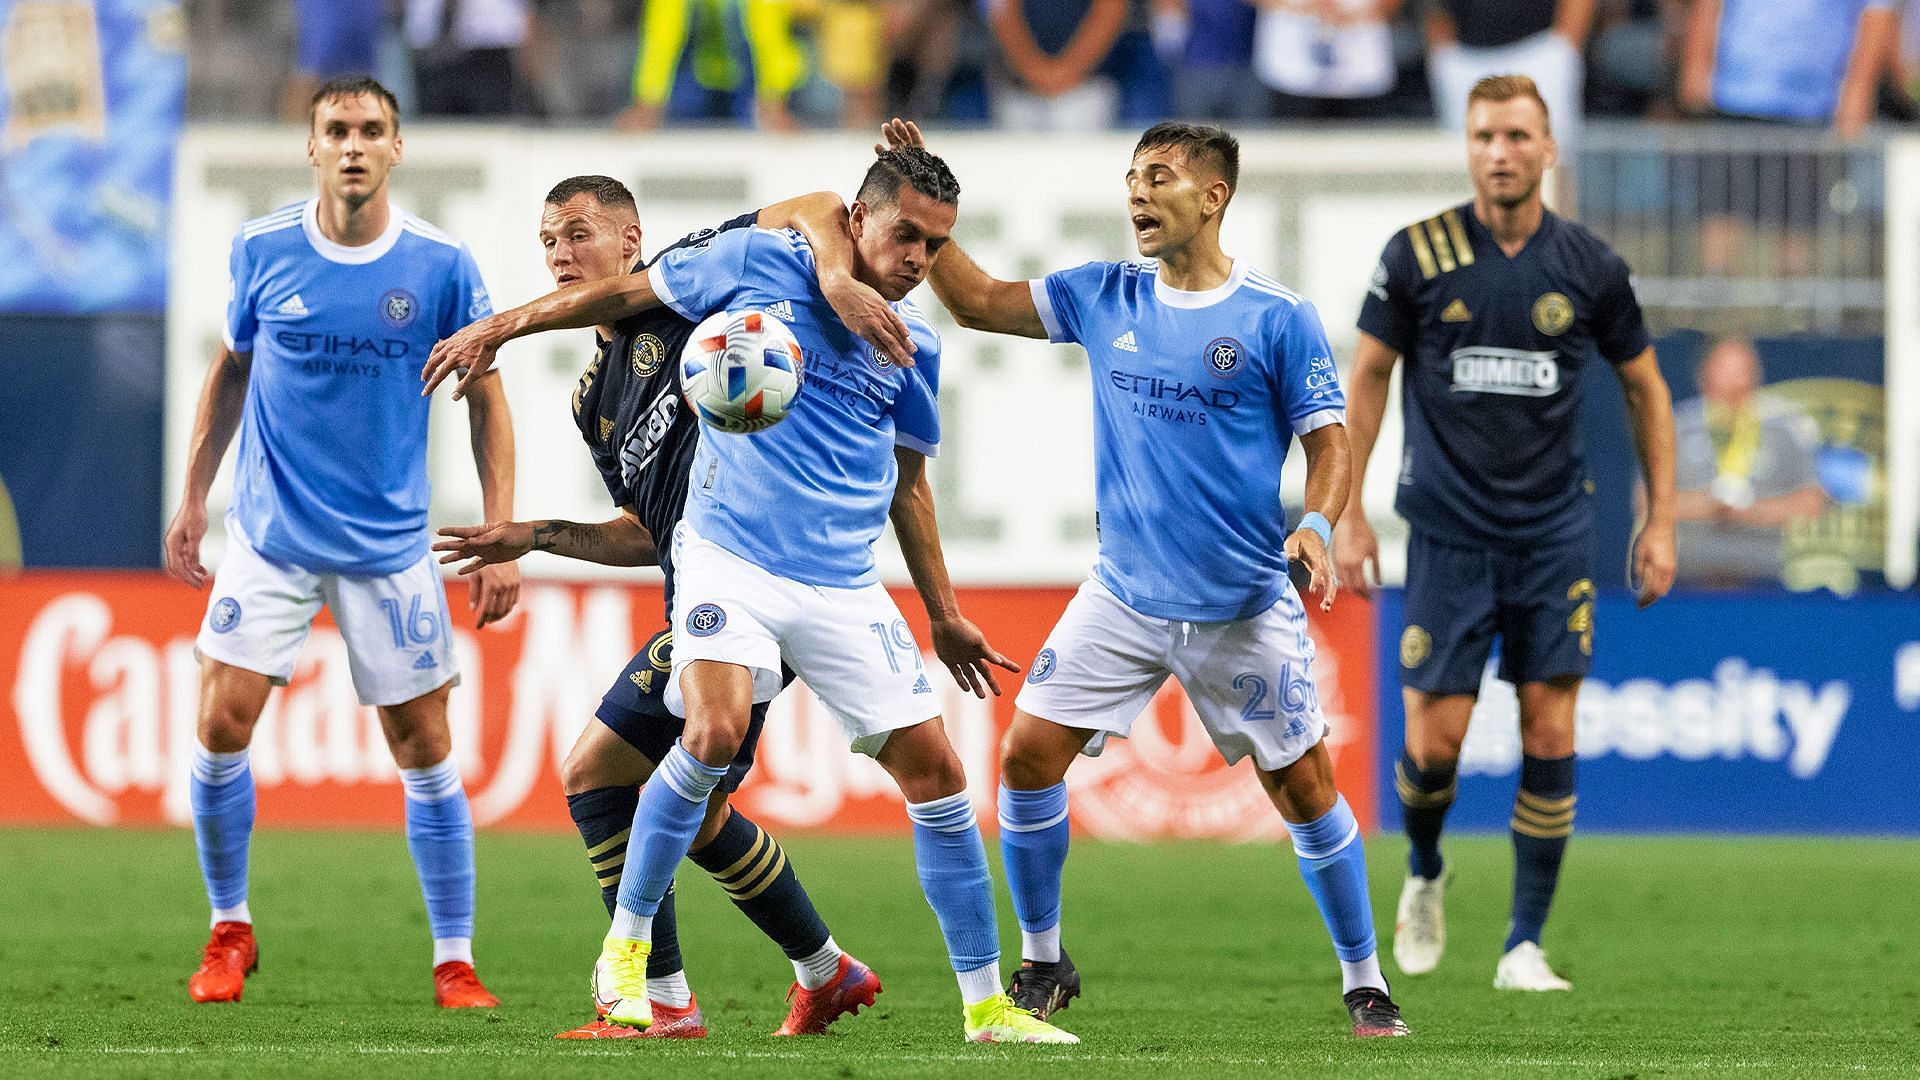 Philadelphia Union and New York City FC go head-to-head in the MLS Cup Eastern Conference finals on Sunday